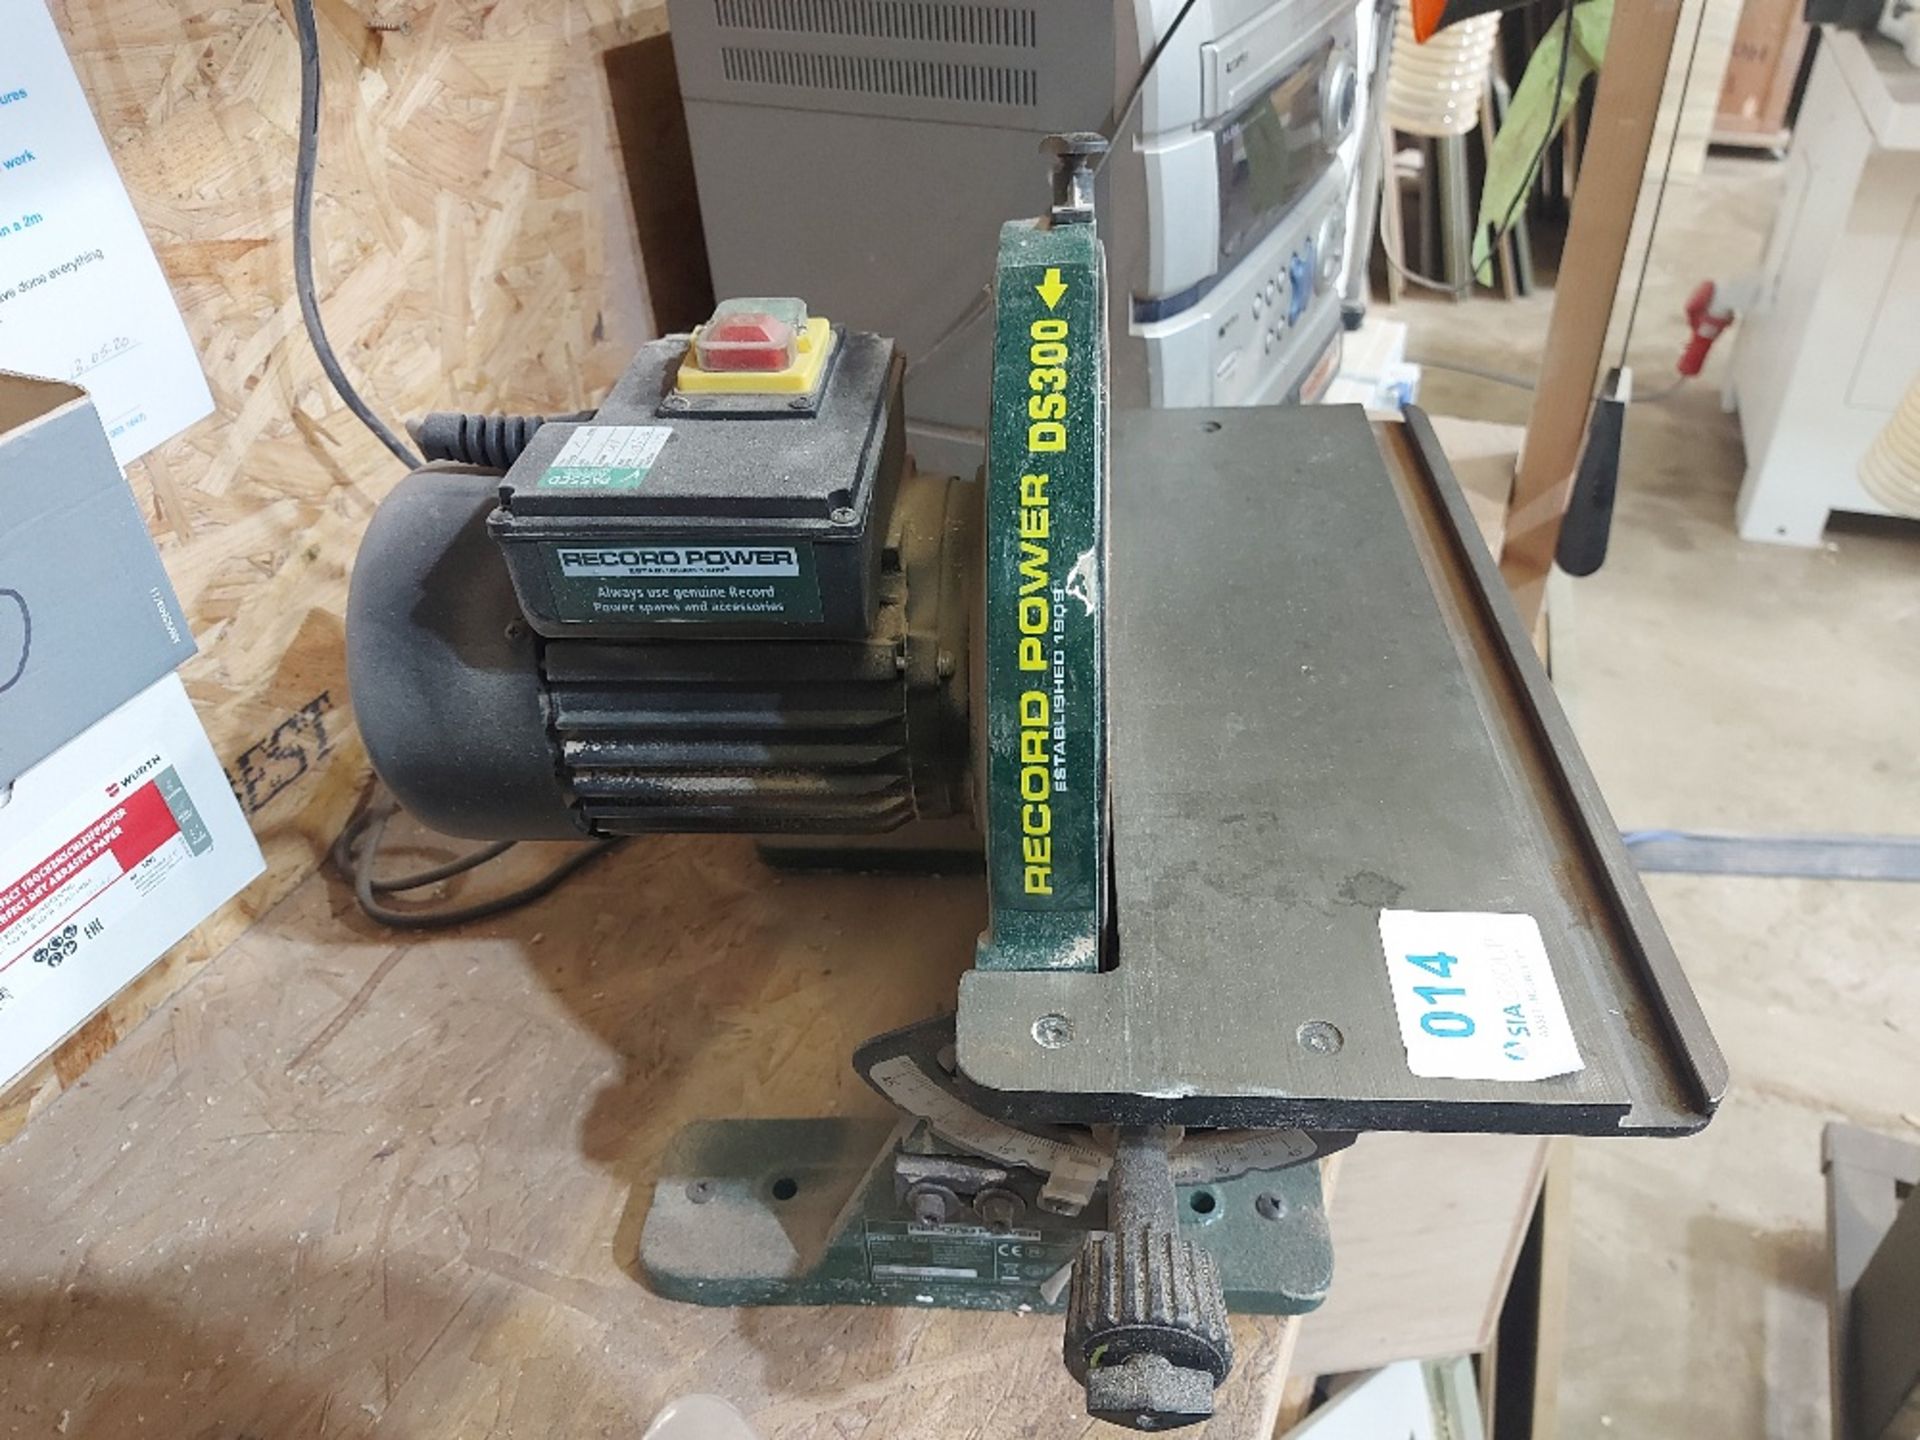 Record Power DS300 12" Cast Iron Disk Sander - Image 2 of 5